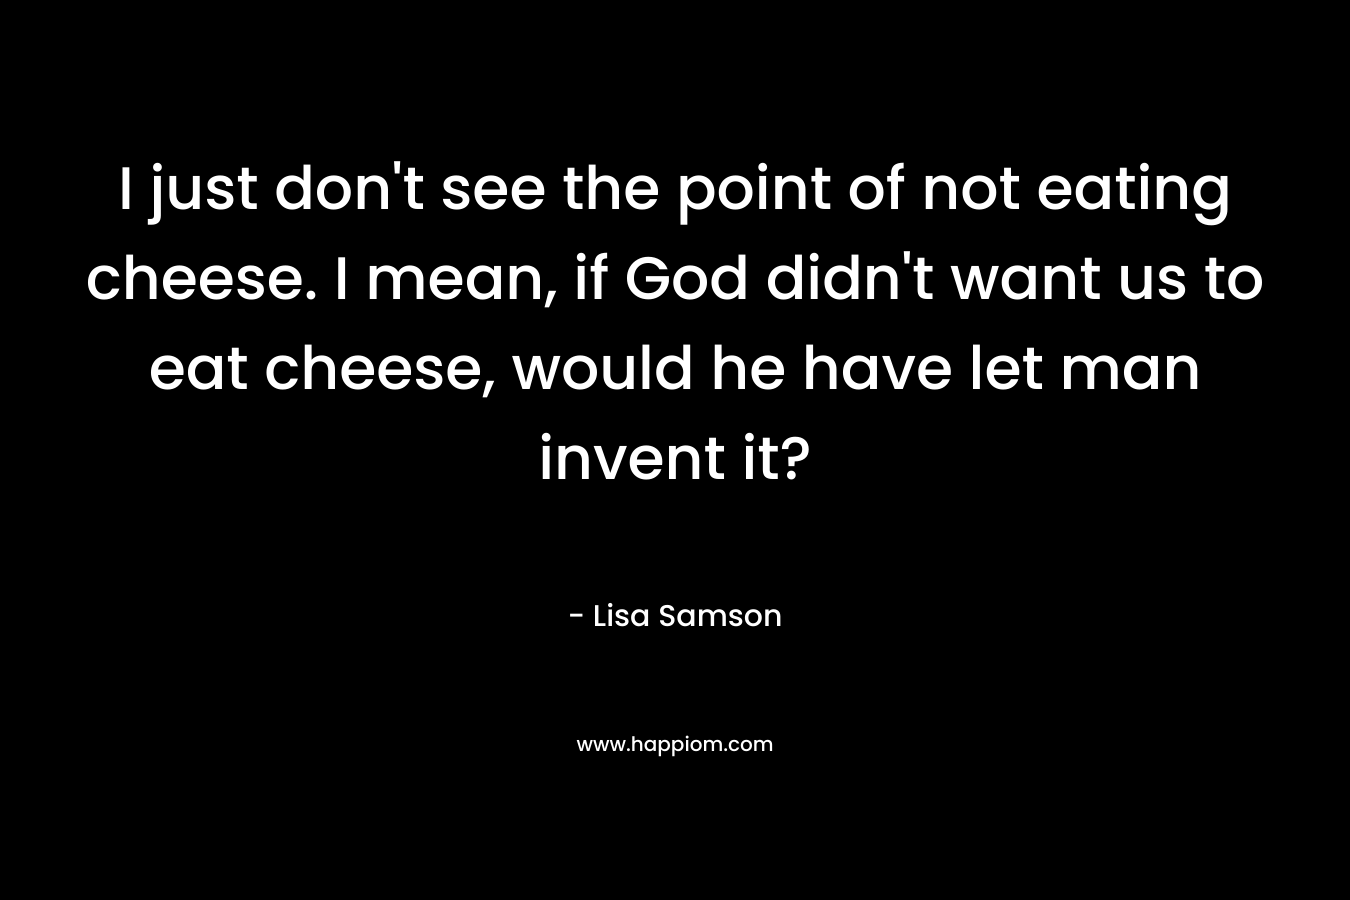 I just don’t see the point of not eating cheese. I mean, if God didn’t want us to eat cheese, would he have let man invent it? – Lisa Samson